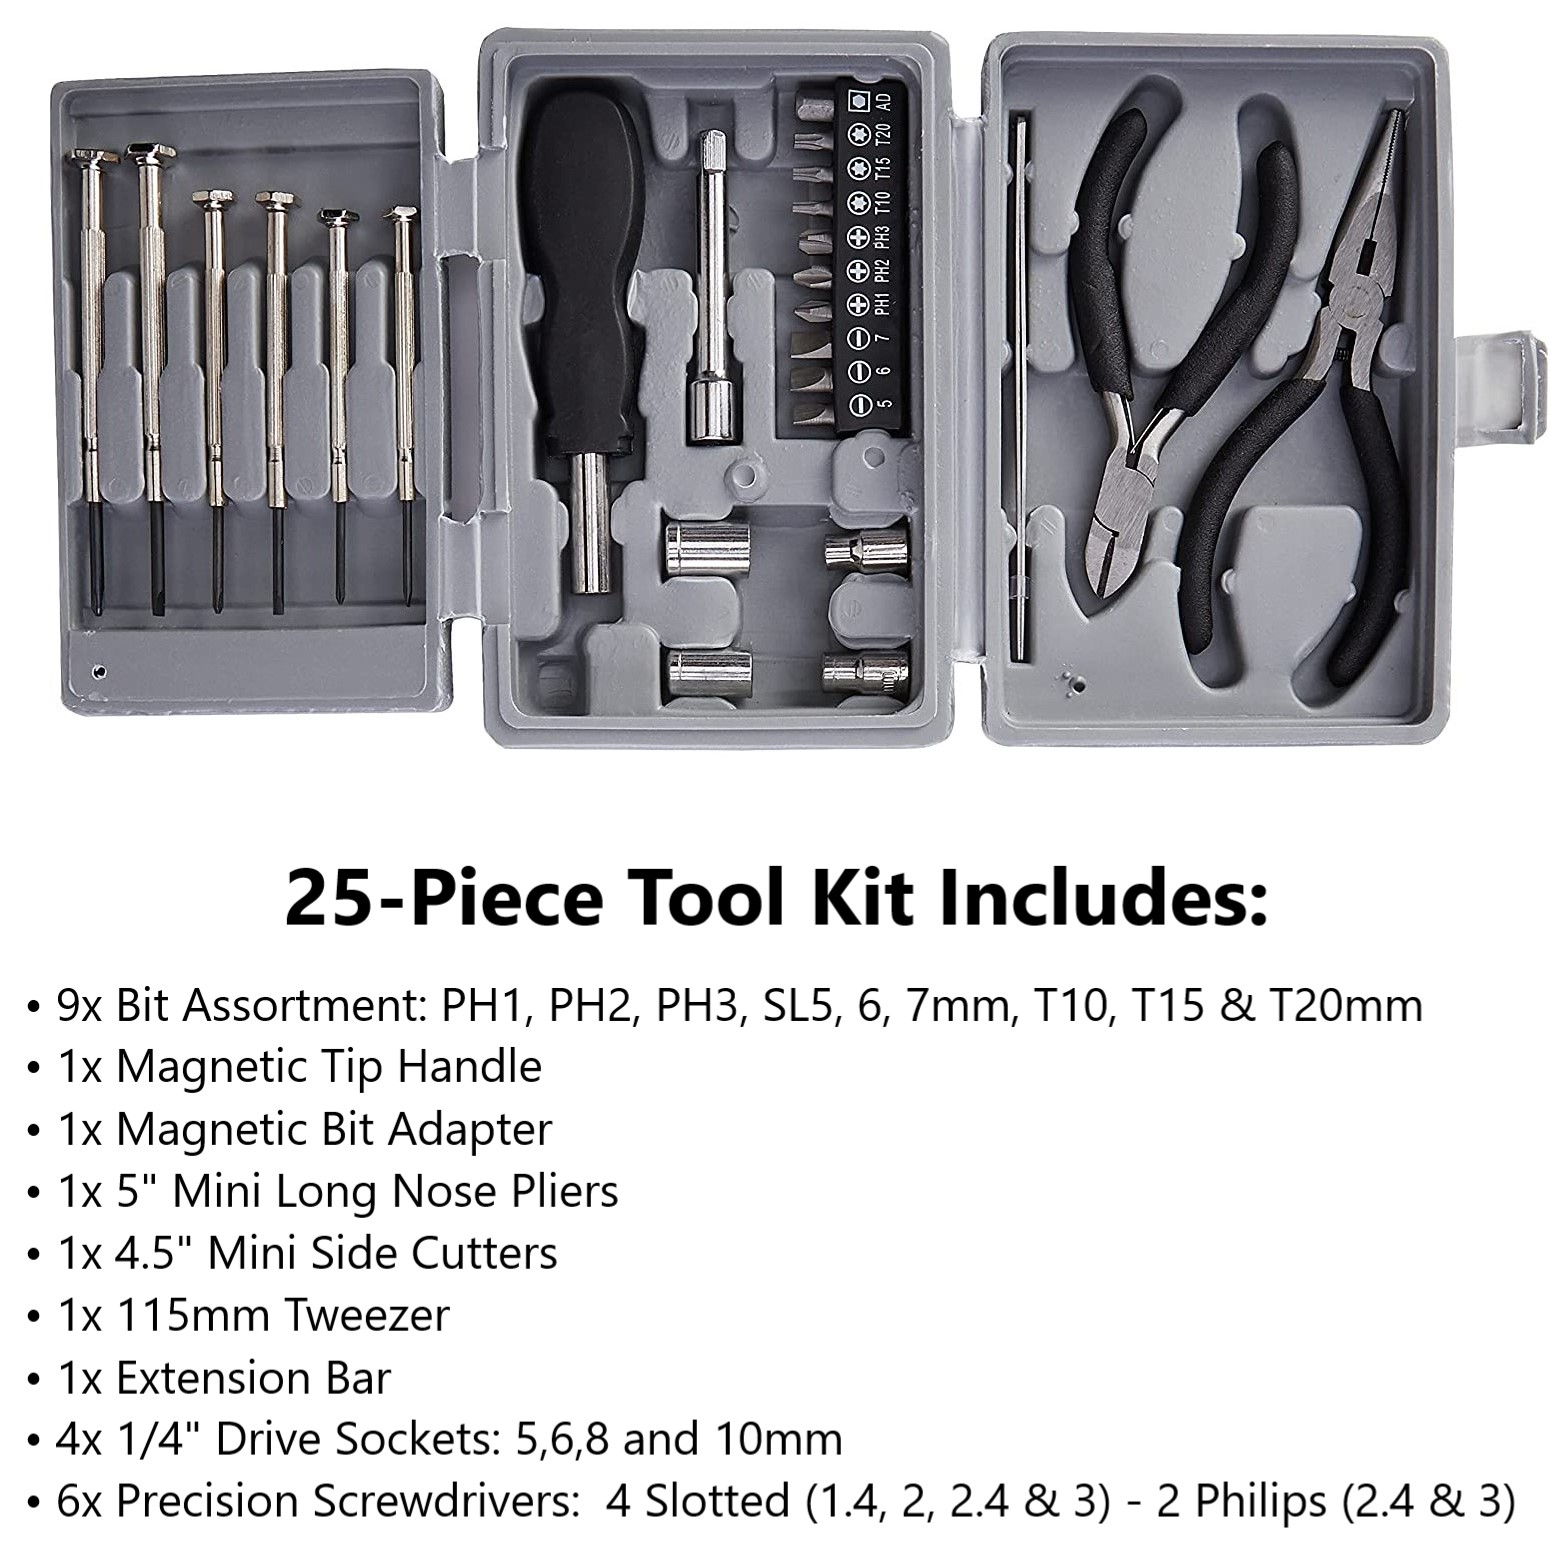 DURATOOL 25-Piece Mini Tool Kit Set for Home, Office, Dorm, and Basic  Repairs - Portable Small Tool Kit with Case for Travel